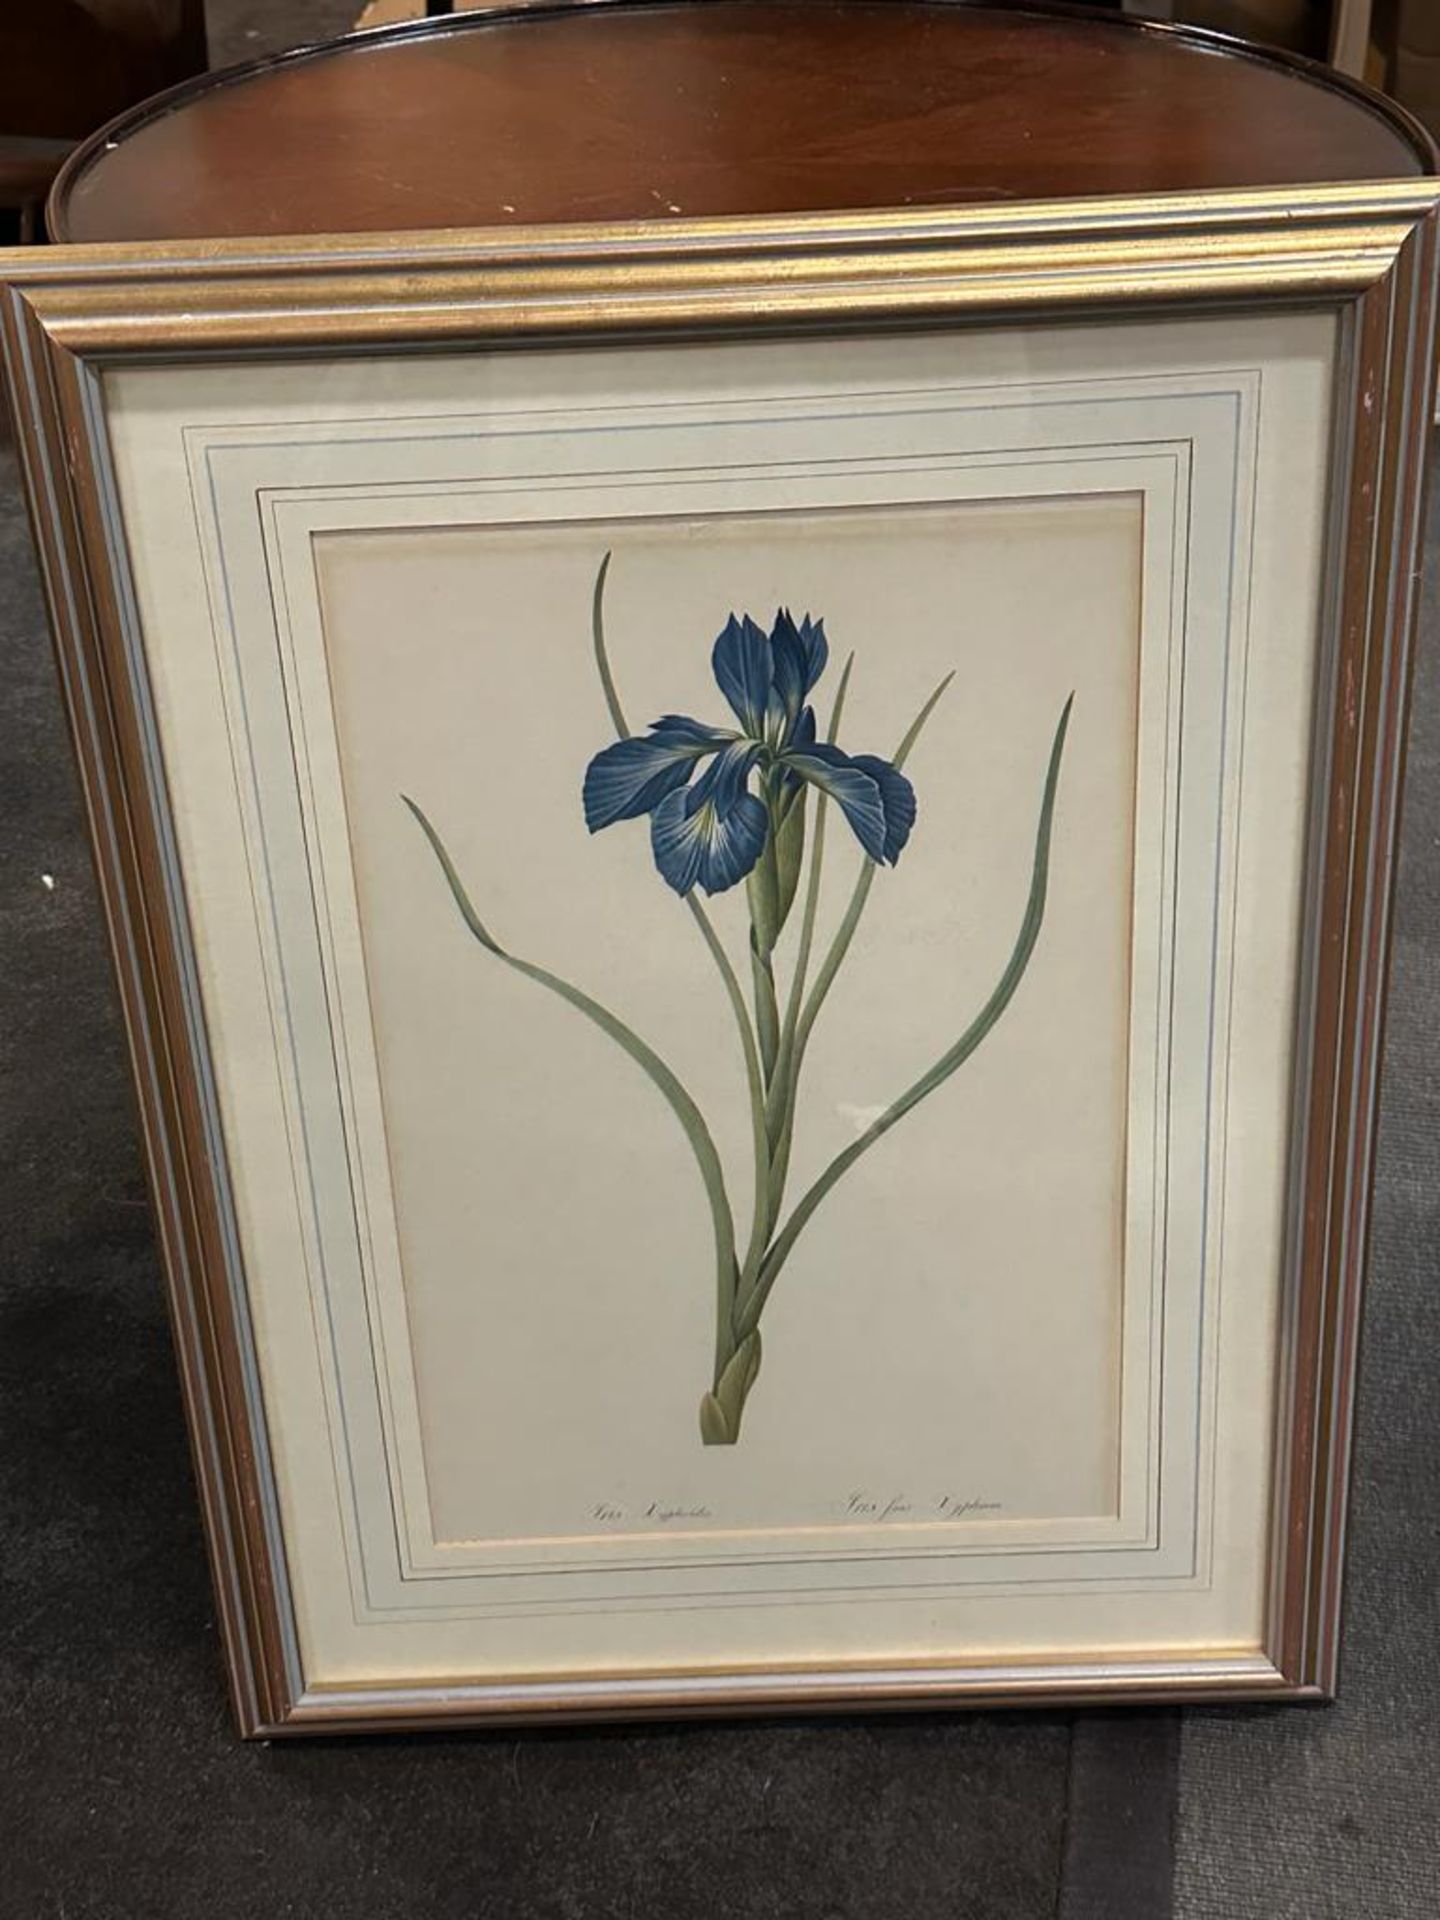 Iris Xyphioides, From Les Liliacees 1808 Framed And Glazed Print - Pierre-Joseph Redoute